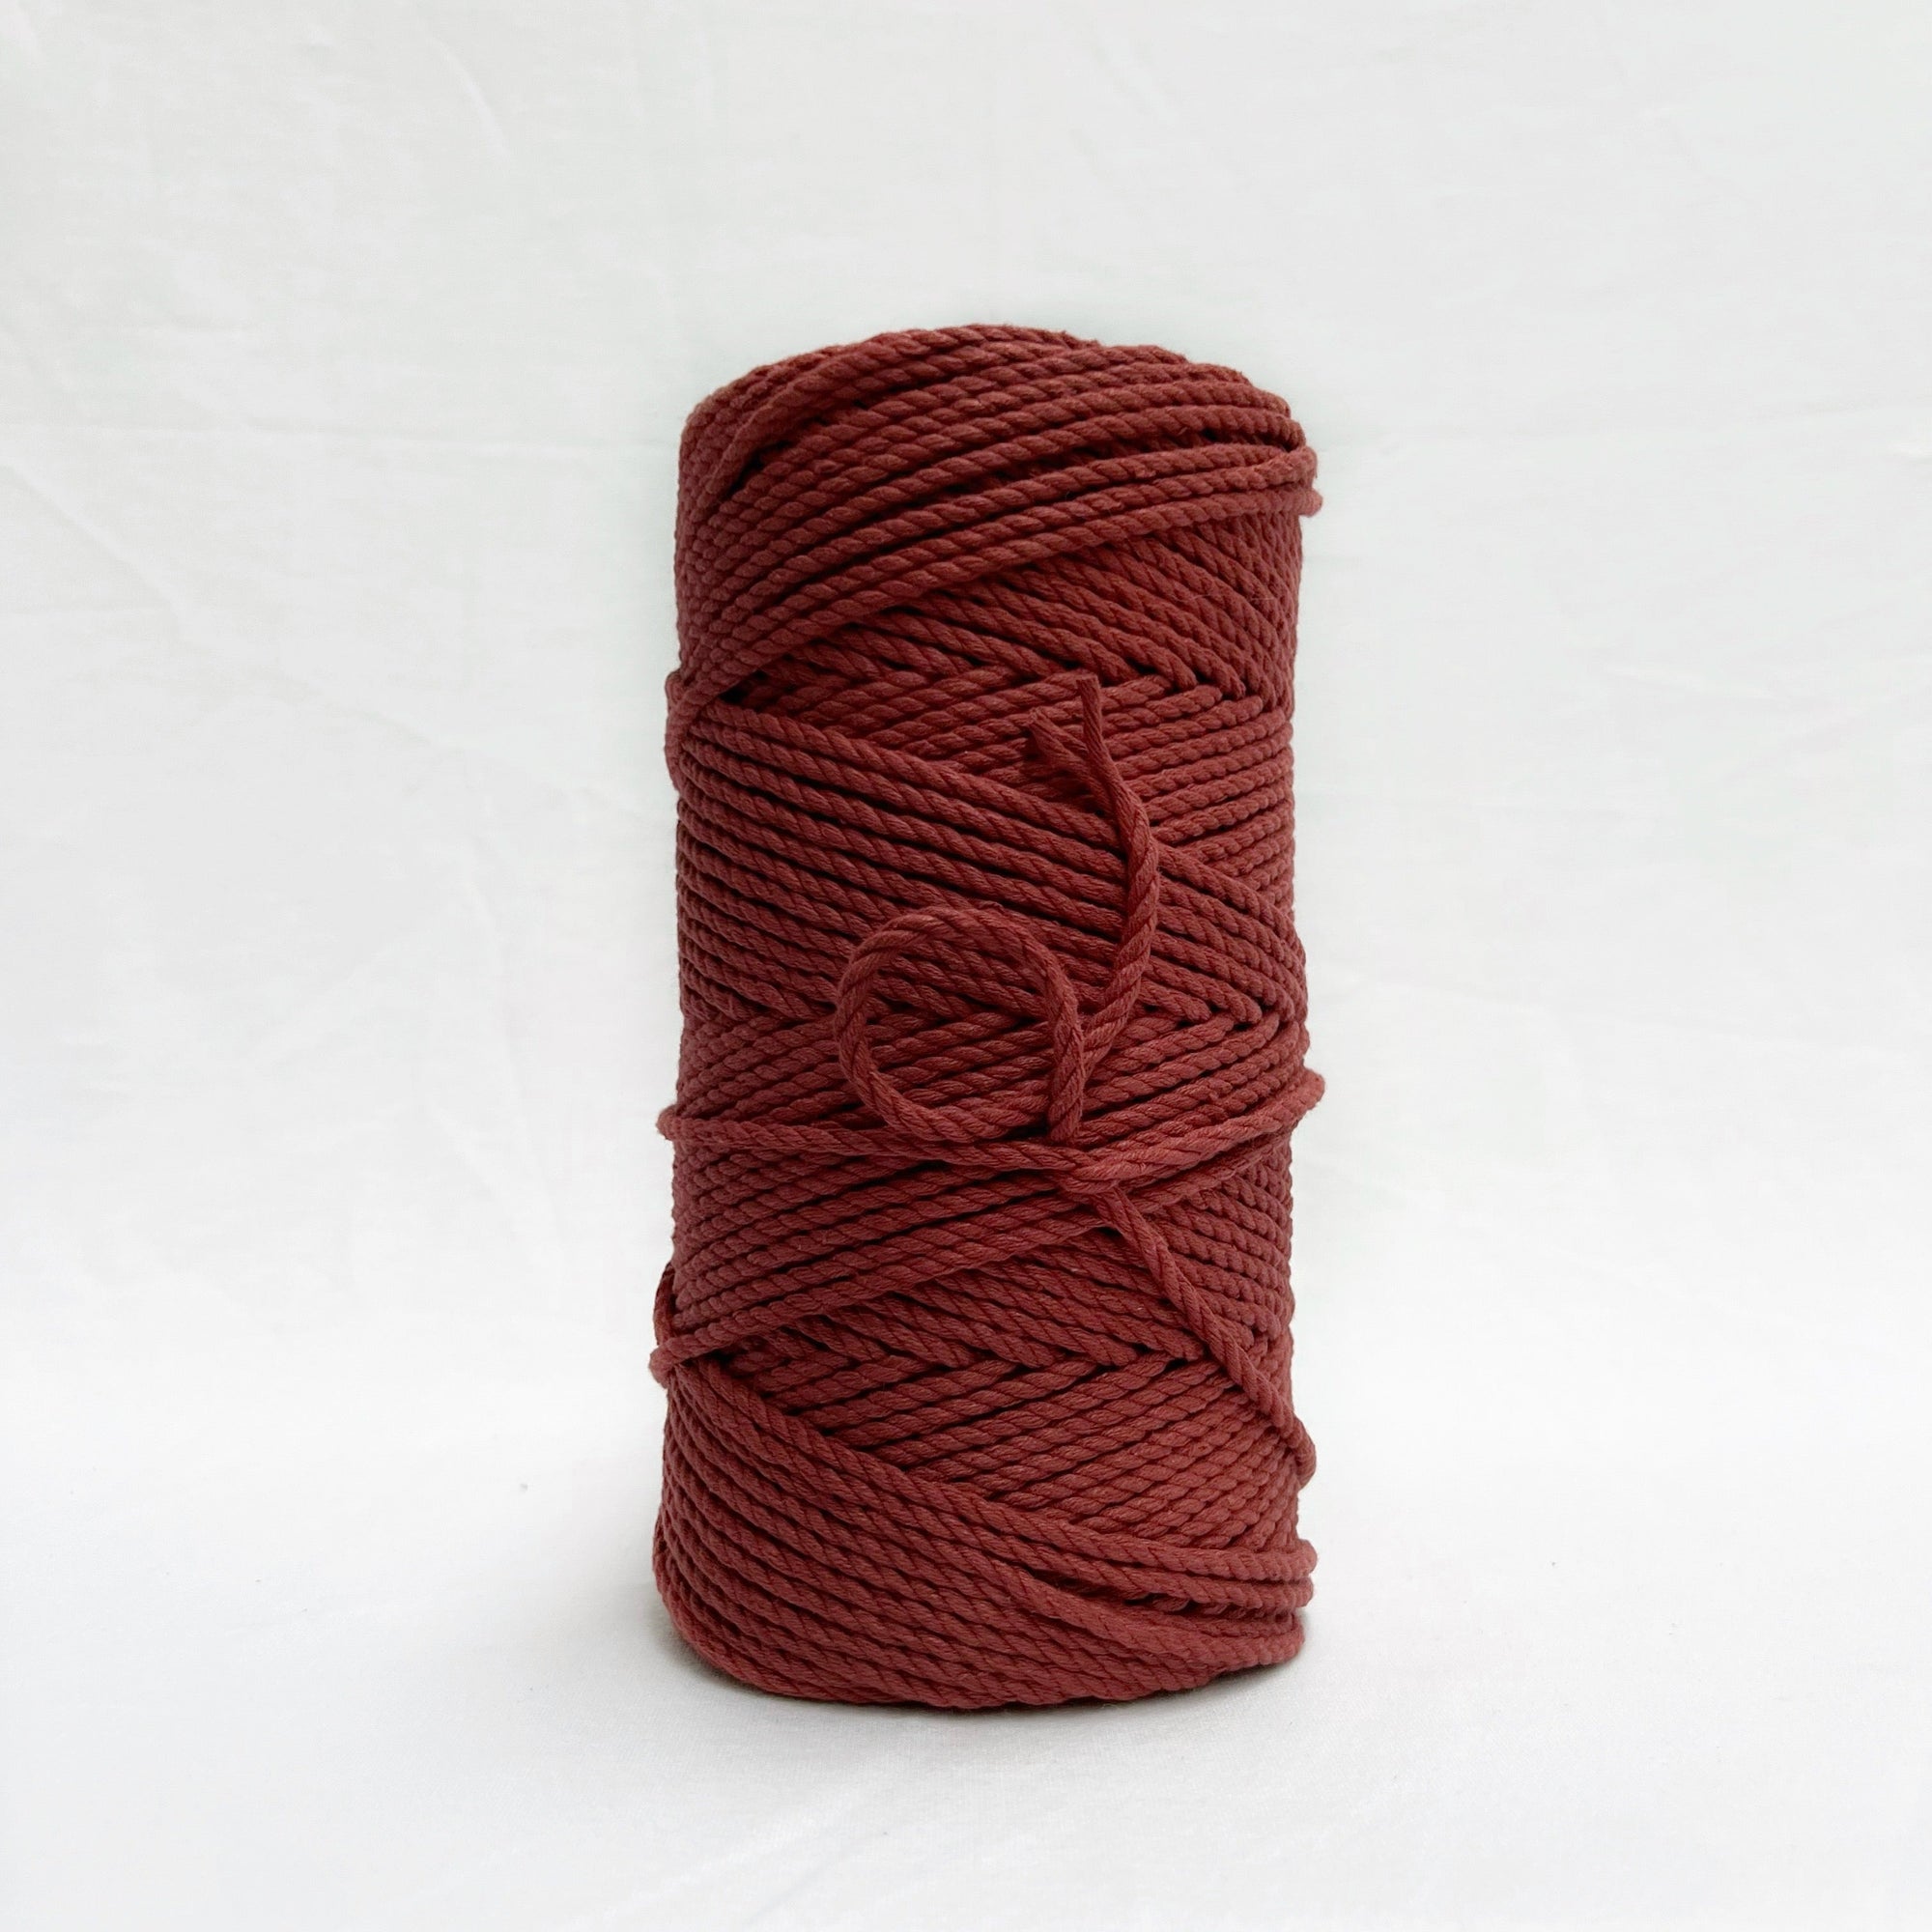 mary maker studio 1kg 4mm recycled cotton macrame rope in apple butter brown red colour suitable for macrame workshops beginners and advanced artists